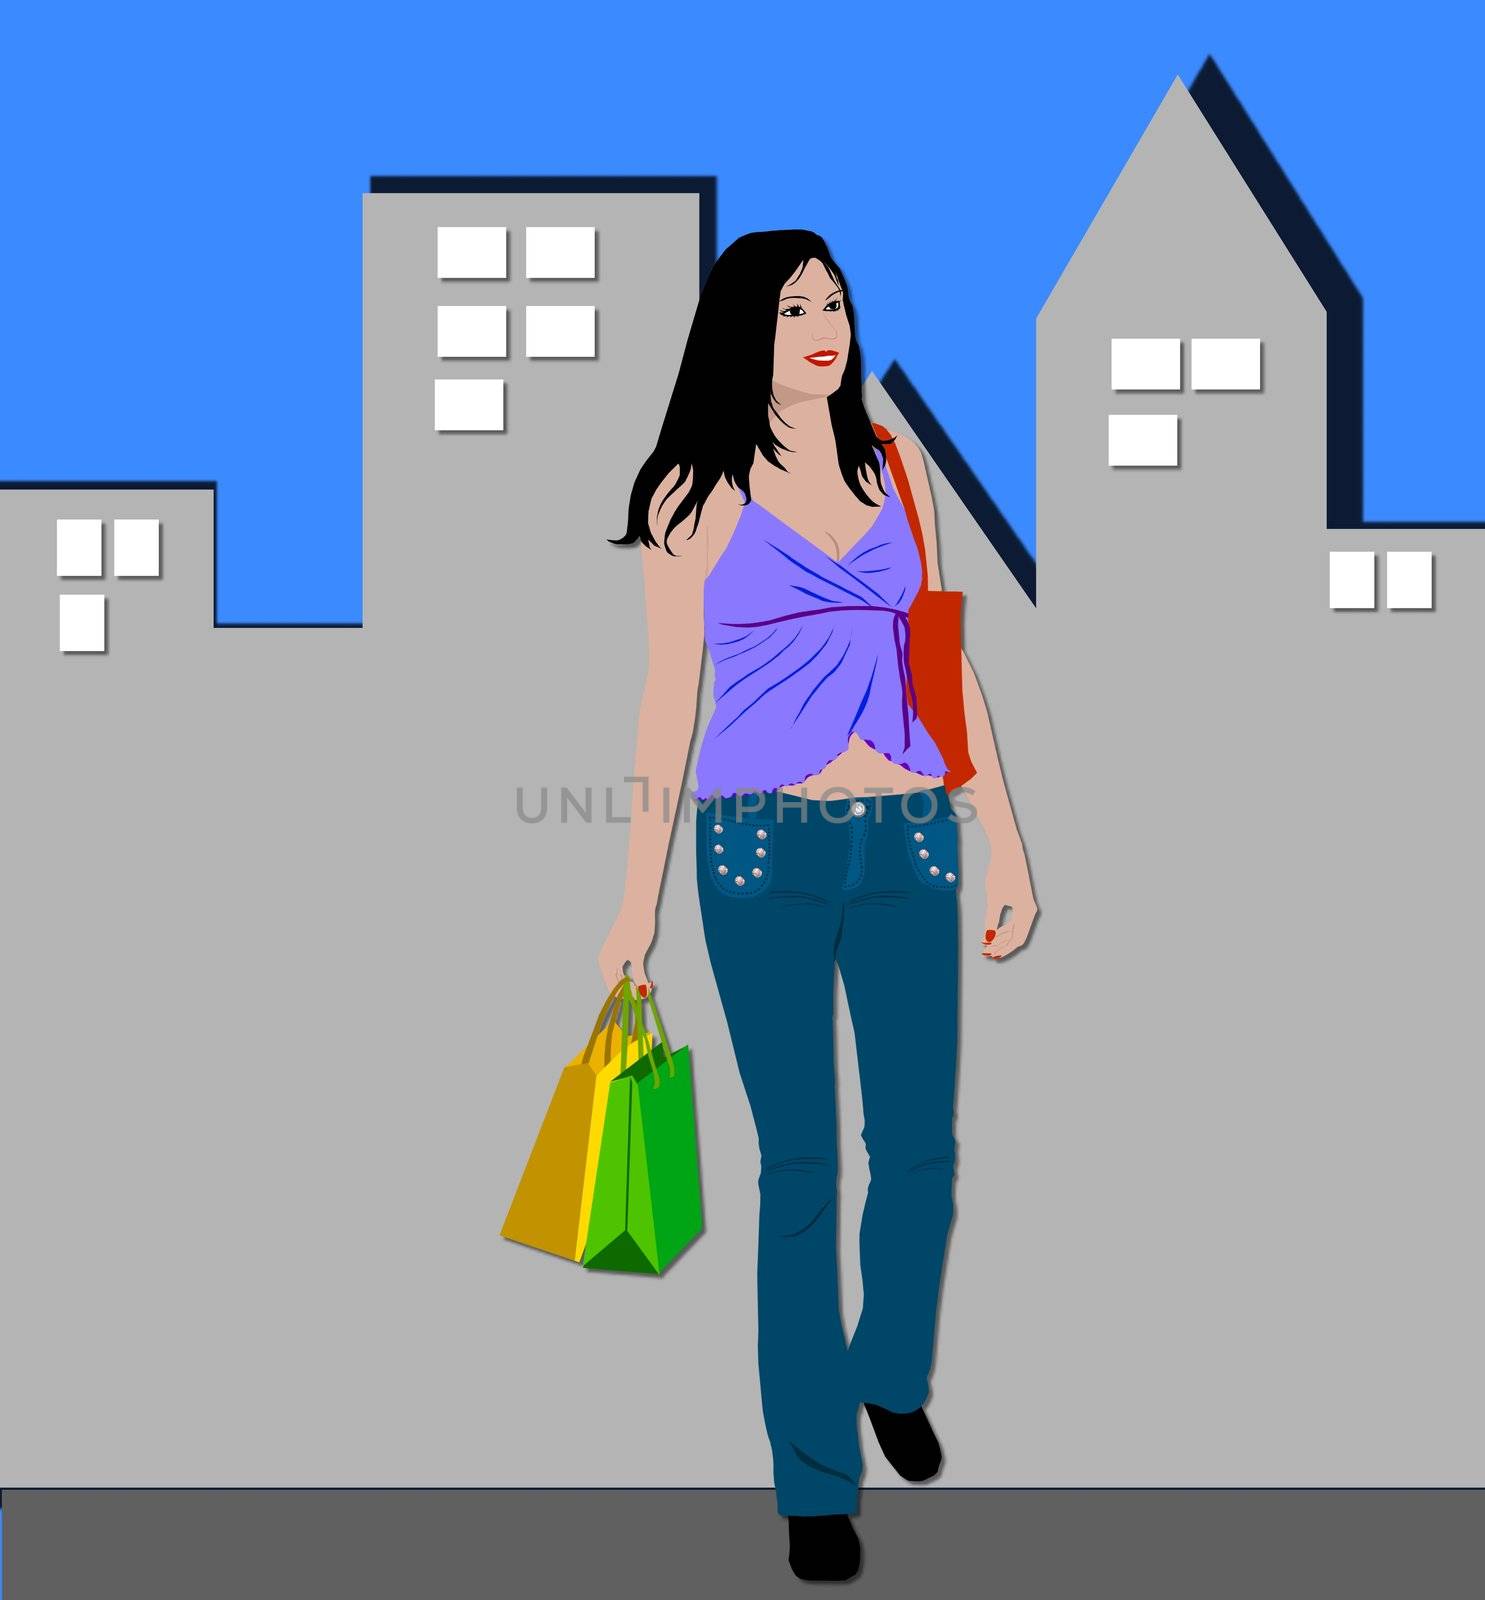 illustration of a shopping woman